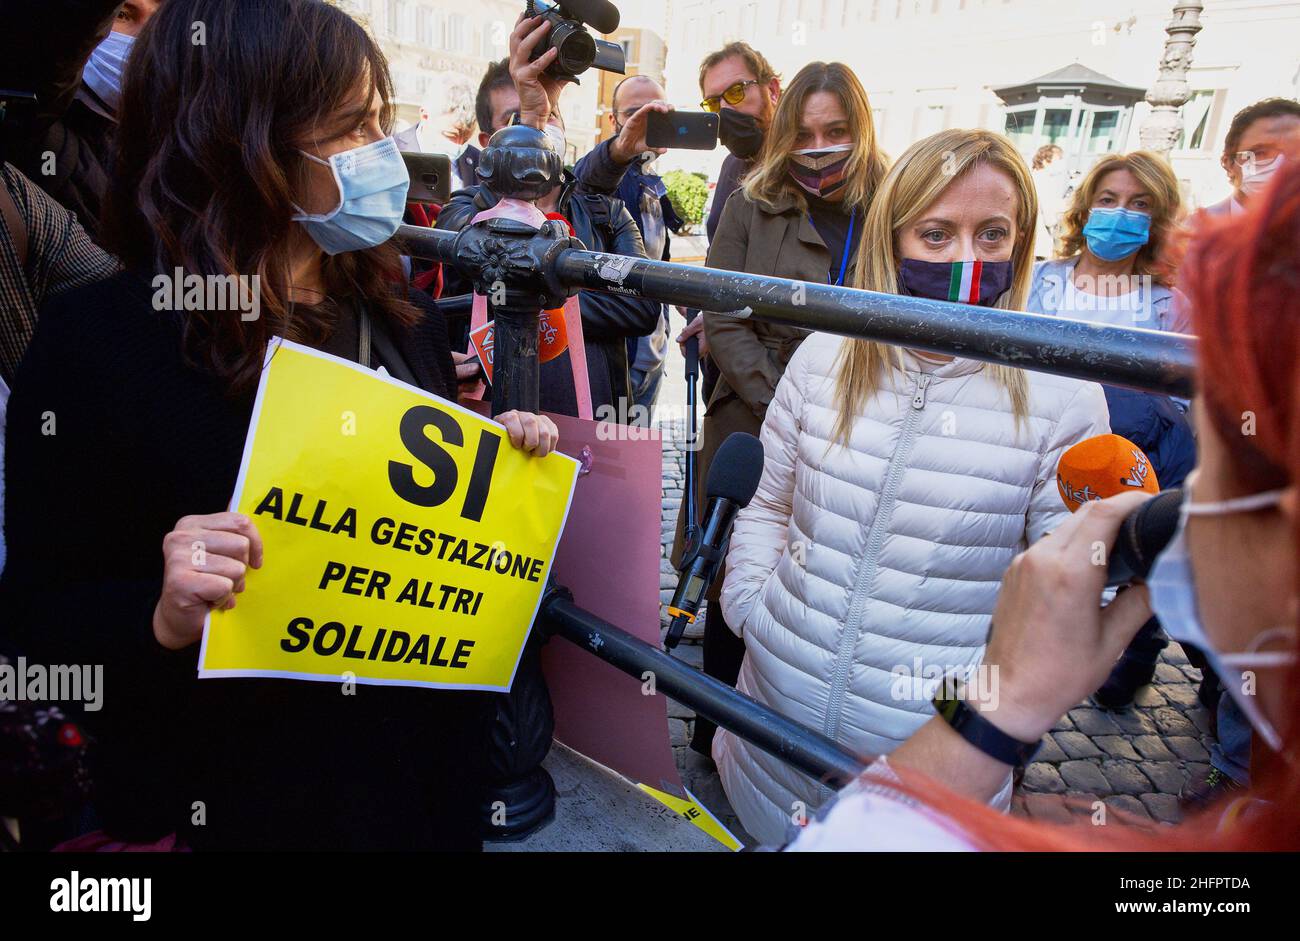 Mauro Scrobogna /LaPresse October 22, 2020&#xa0; Rome, Italy Politics Montecitorio - Coscioni association demonstration &quot;the Roki girls&quot; In the photo: The leader of the Brothers of Italy Giorgia Meloni with the demonstrators suffering from Rokitansky syndrome, born without the uterus. They could have children through the technique of assisted fertilization with gestation for others, a practice that Meloni's own bill wants to make a crime. Stock Photo